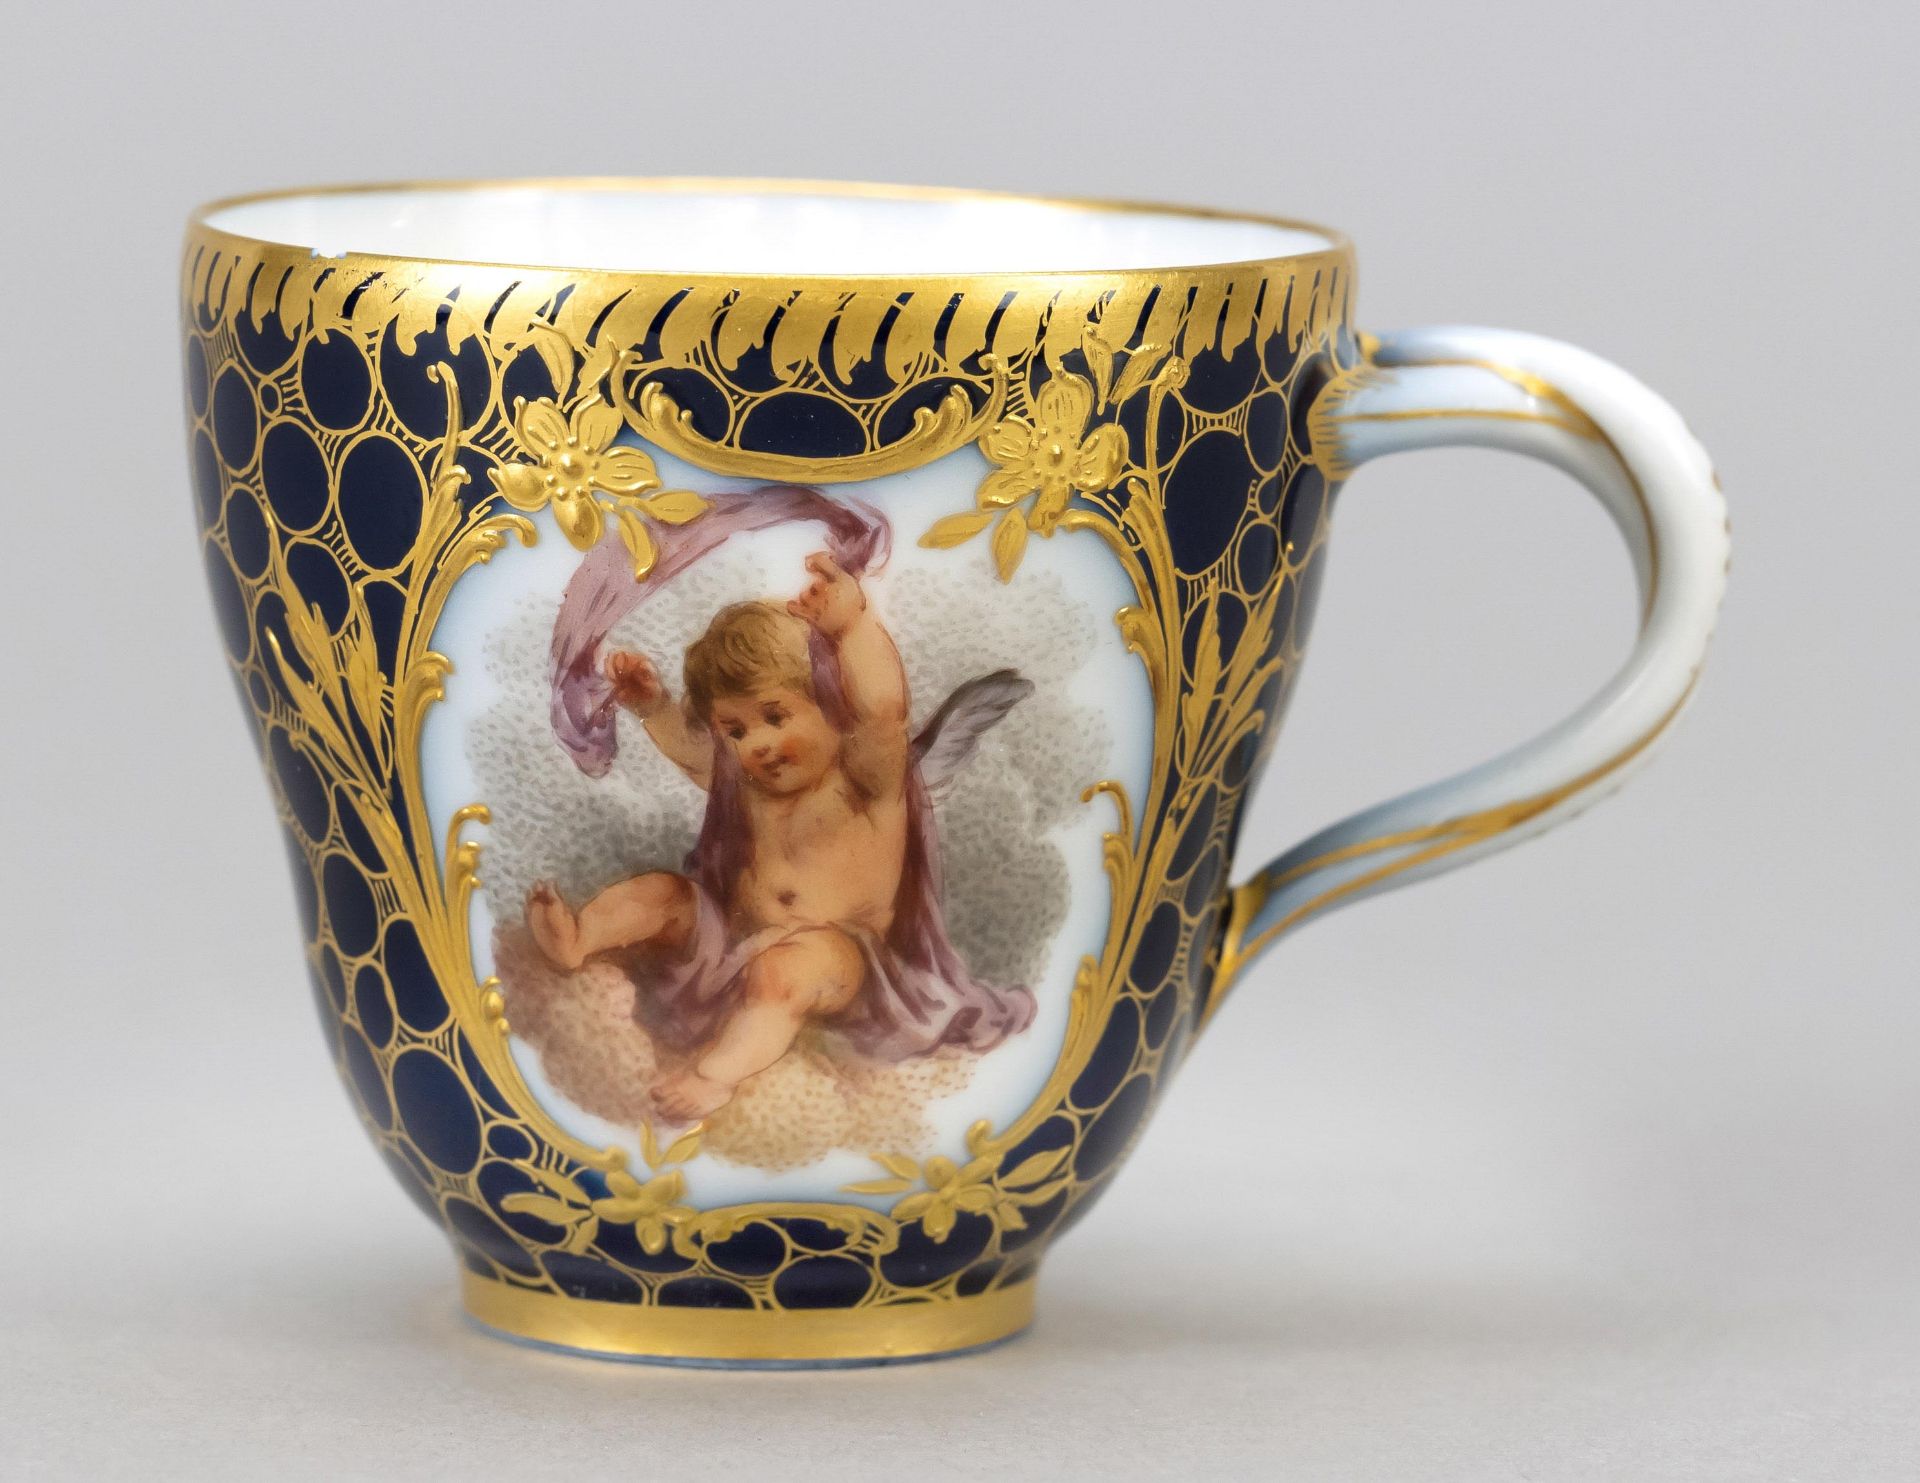 Demitasse with saucer, KPM Berlin, 19th c., 1st w., painter's mark, two-piece ear handle, polychrome - Image 3 of 4